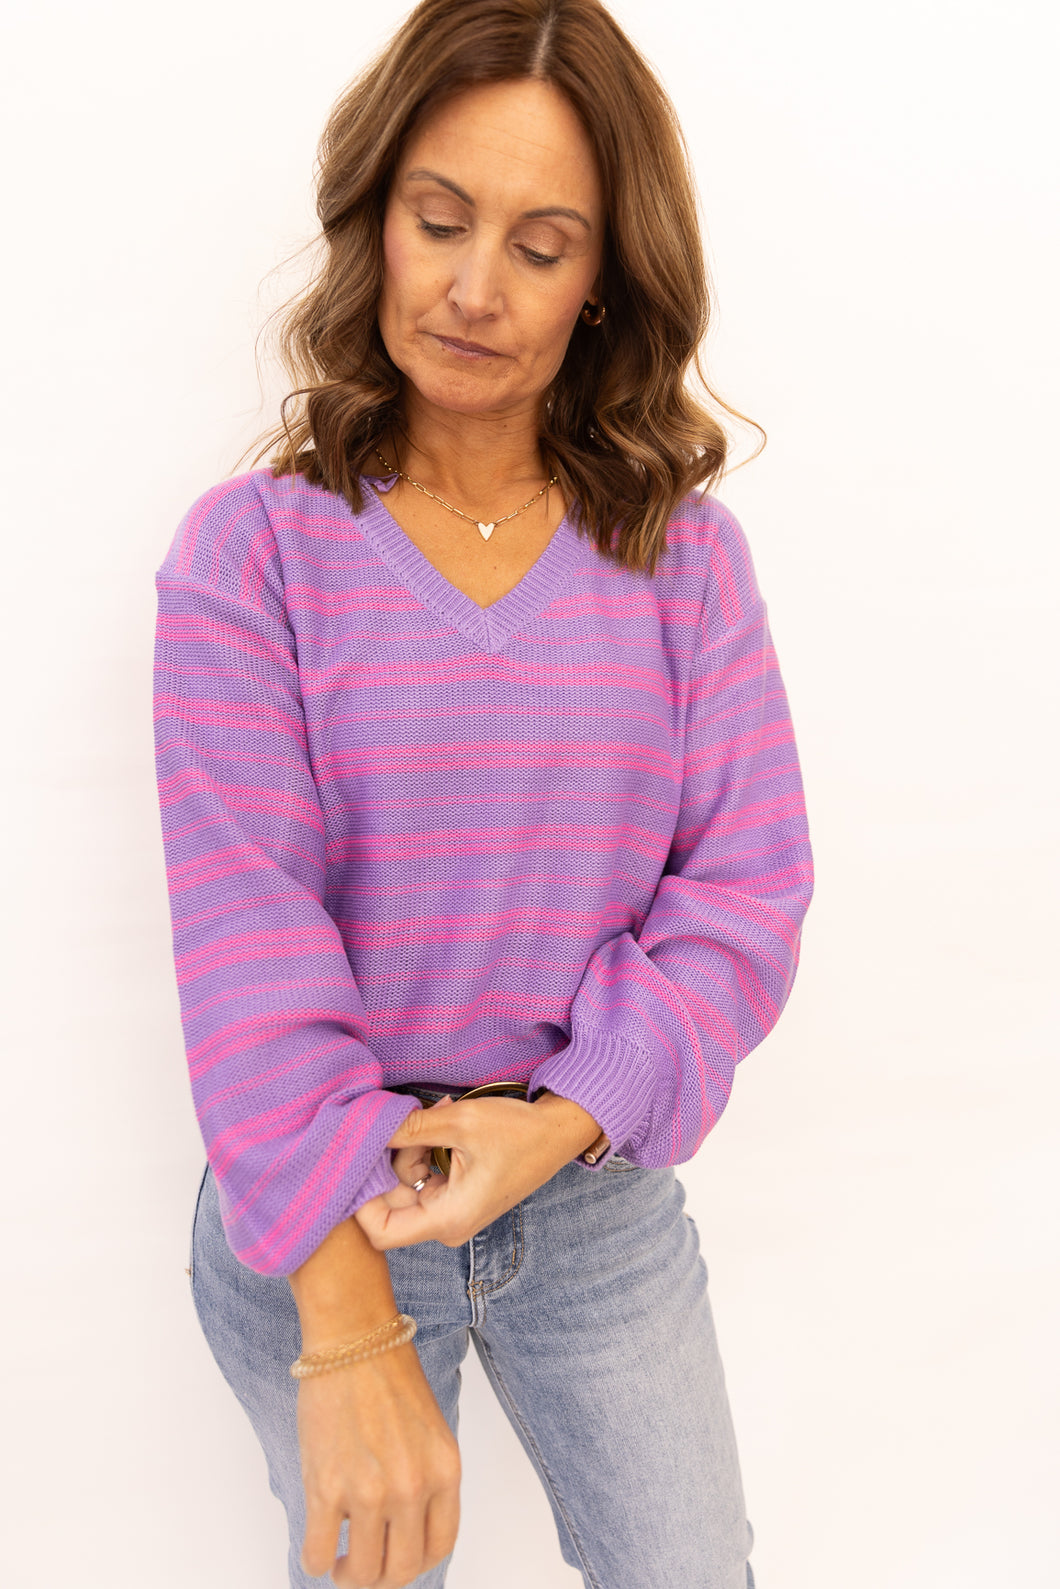 Delilah Purple/Pink Striped Top